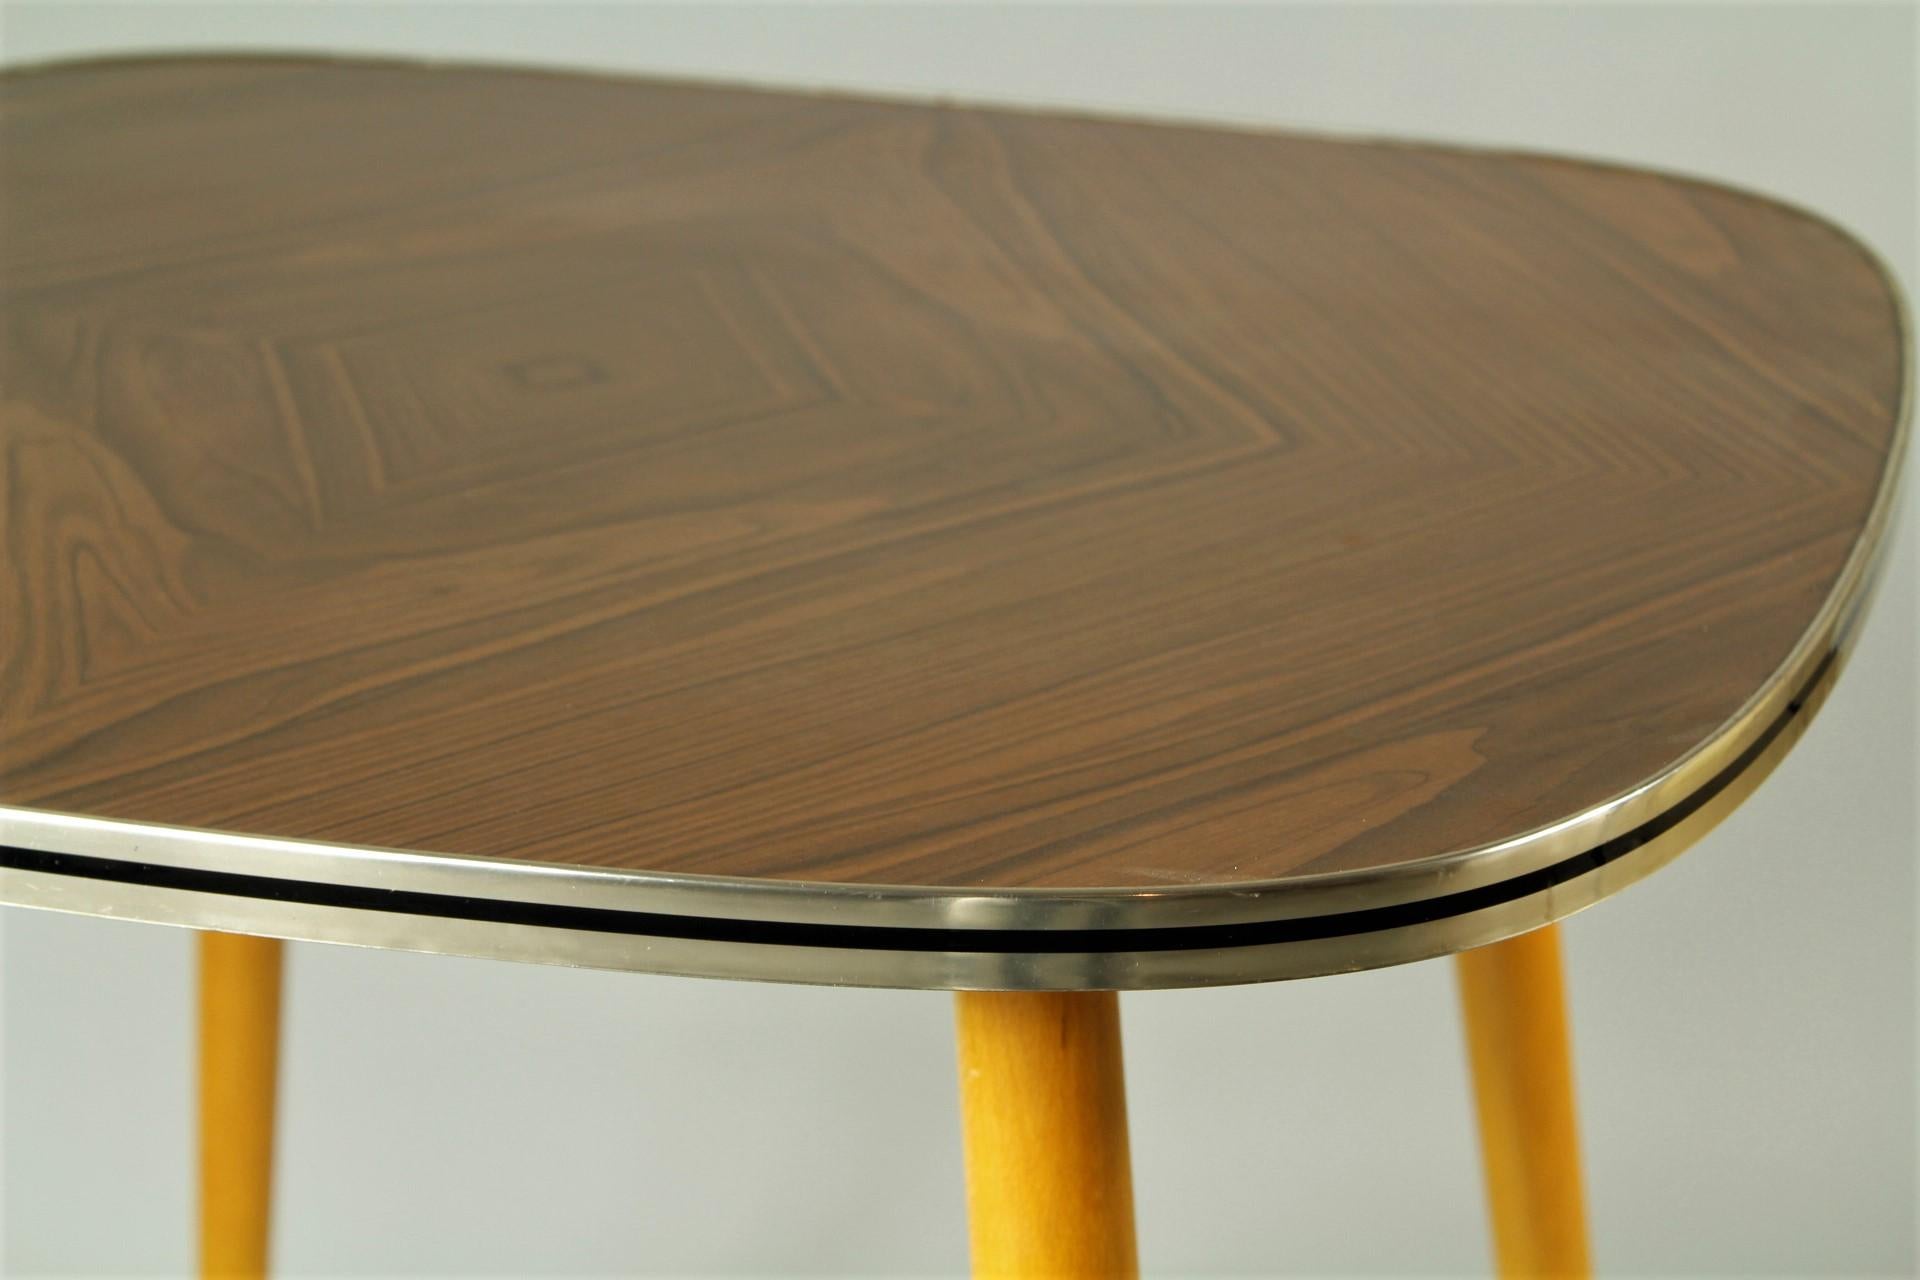 1970s German Formica Coffee Table In Good Condition For Sale In Tochovice, CZ